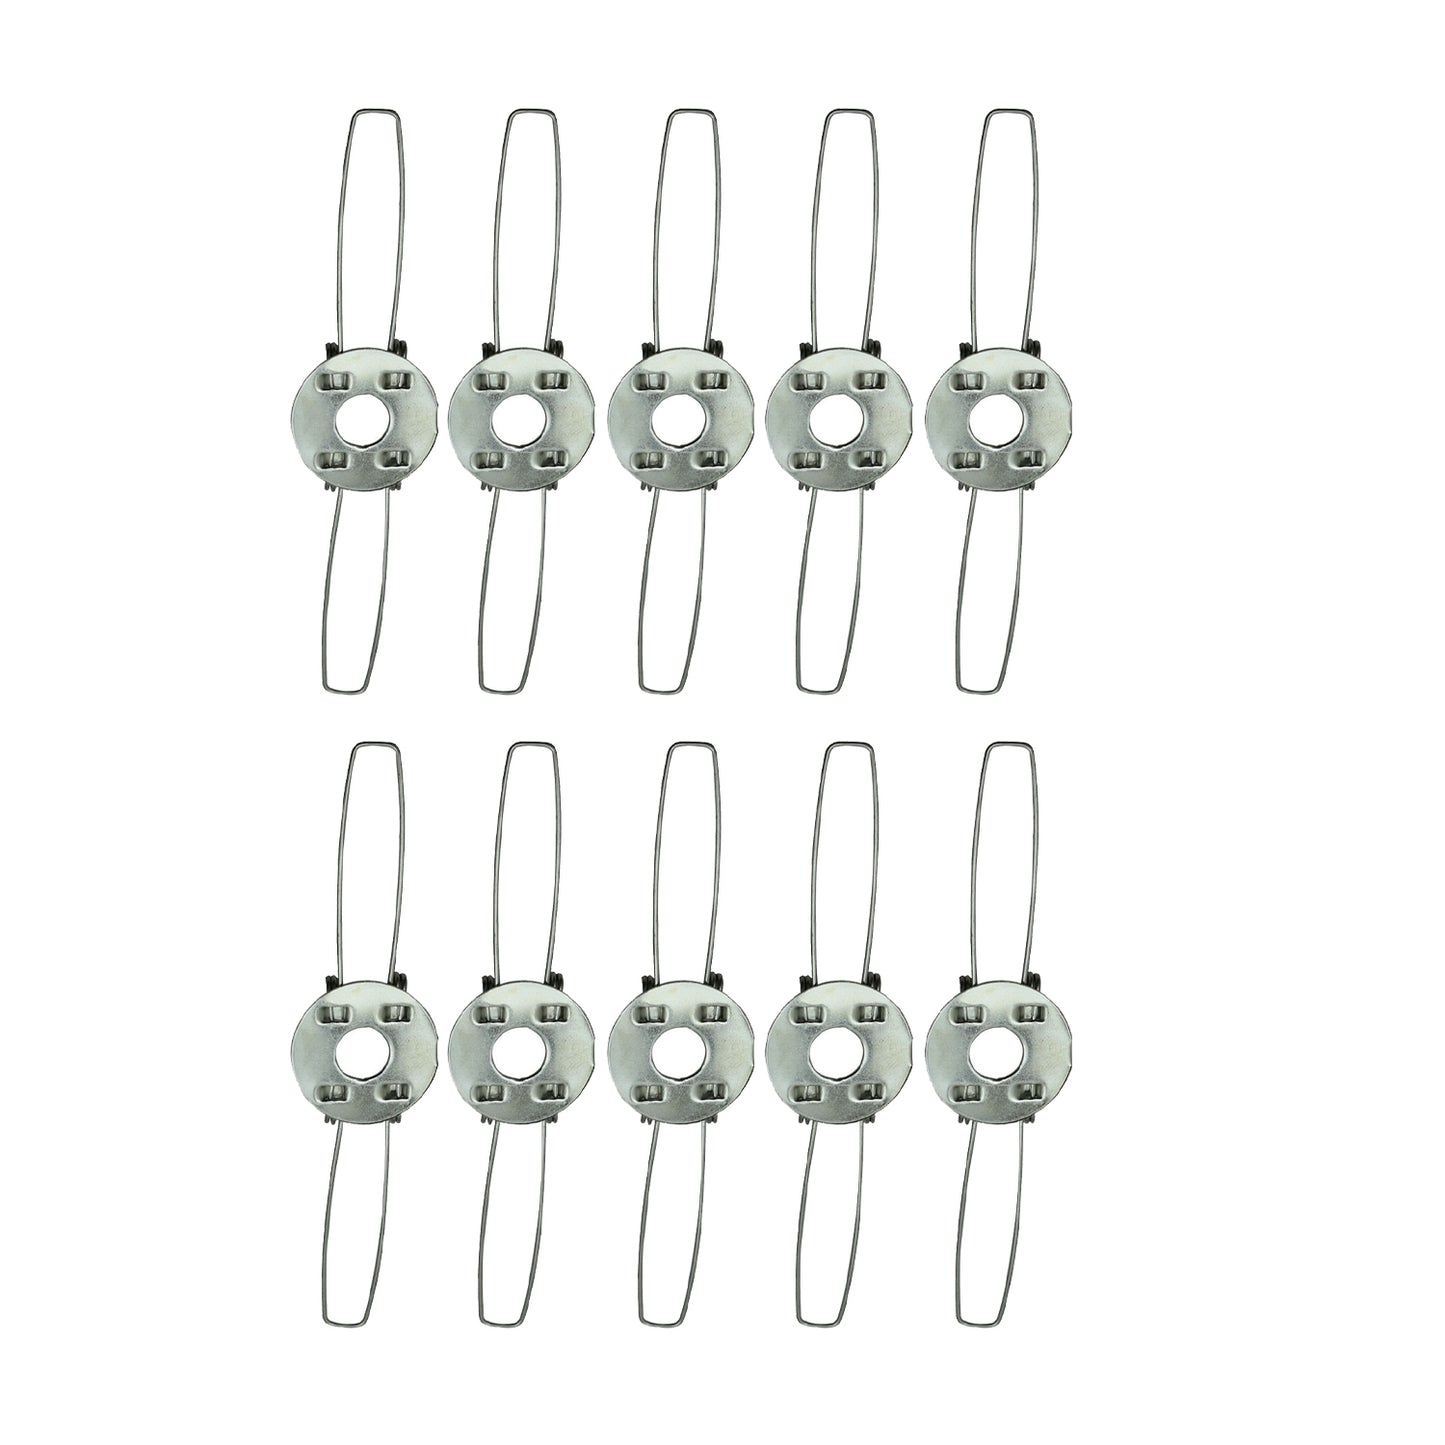 Spring Clip Retainer for Lamp Shade.JPG